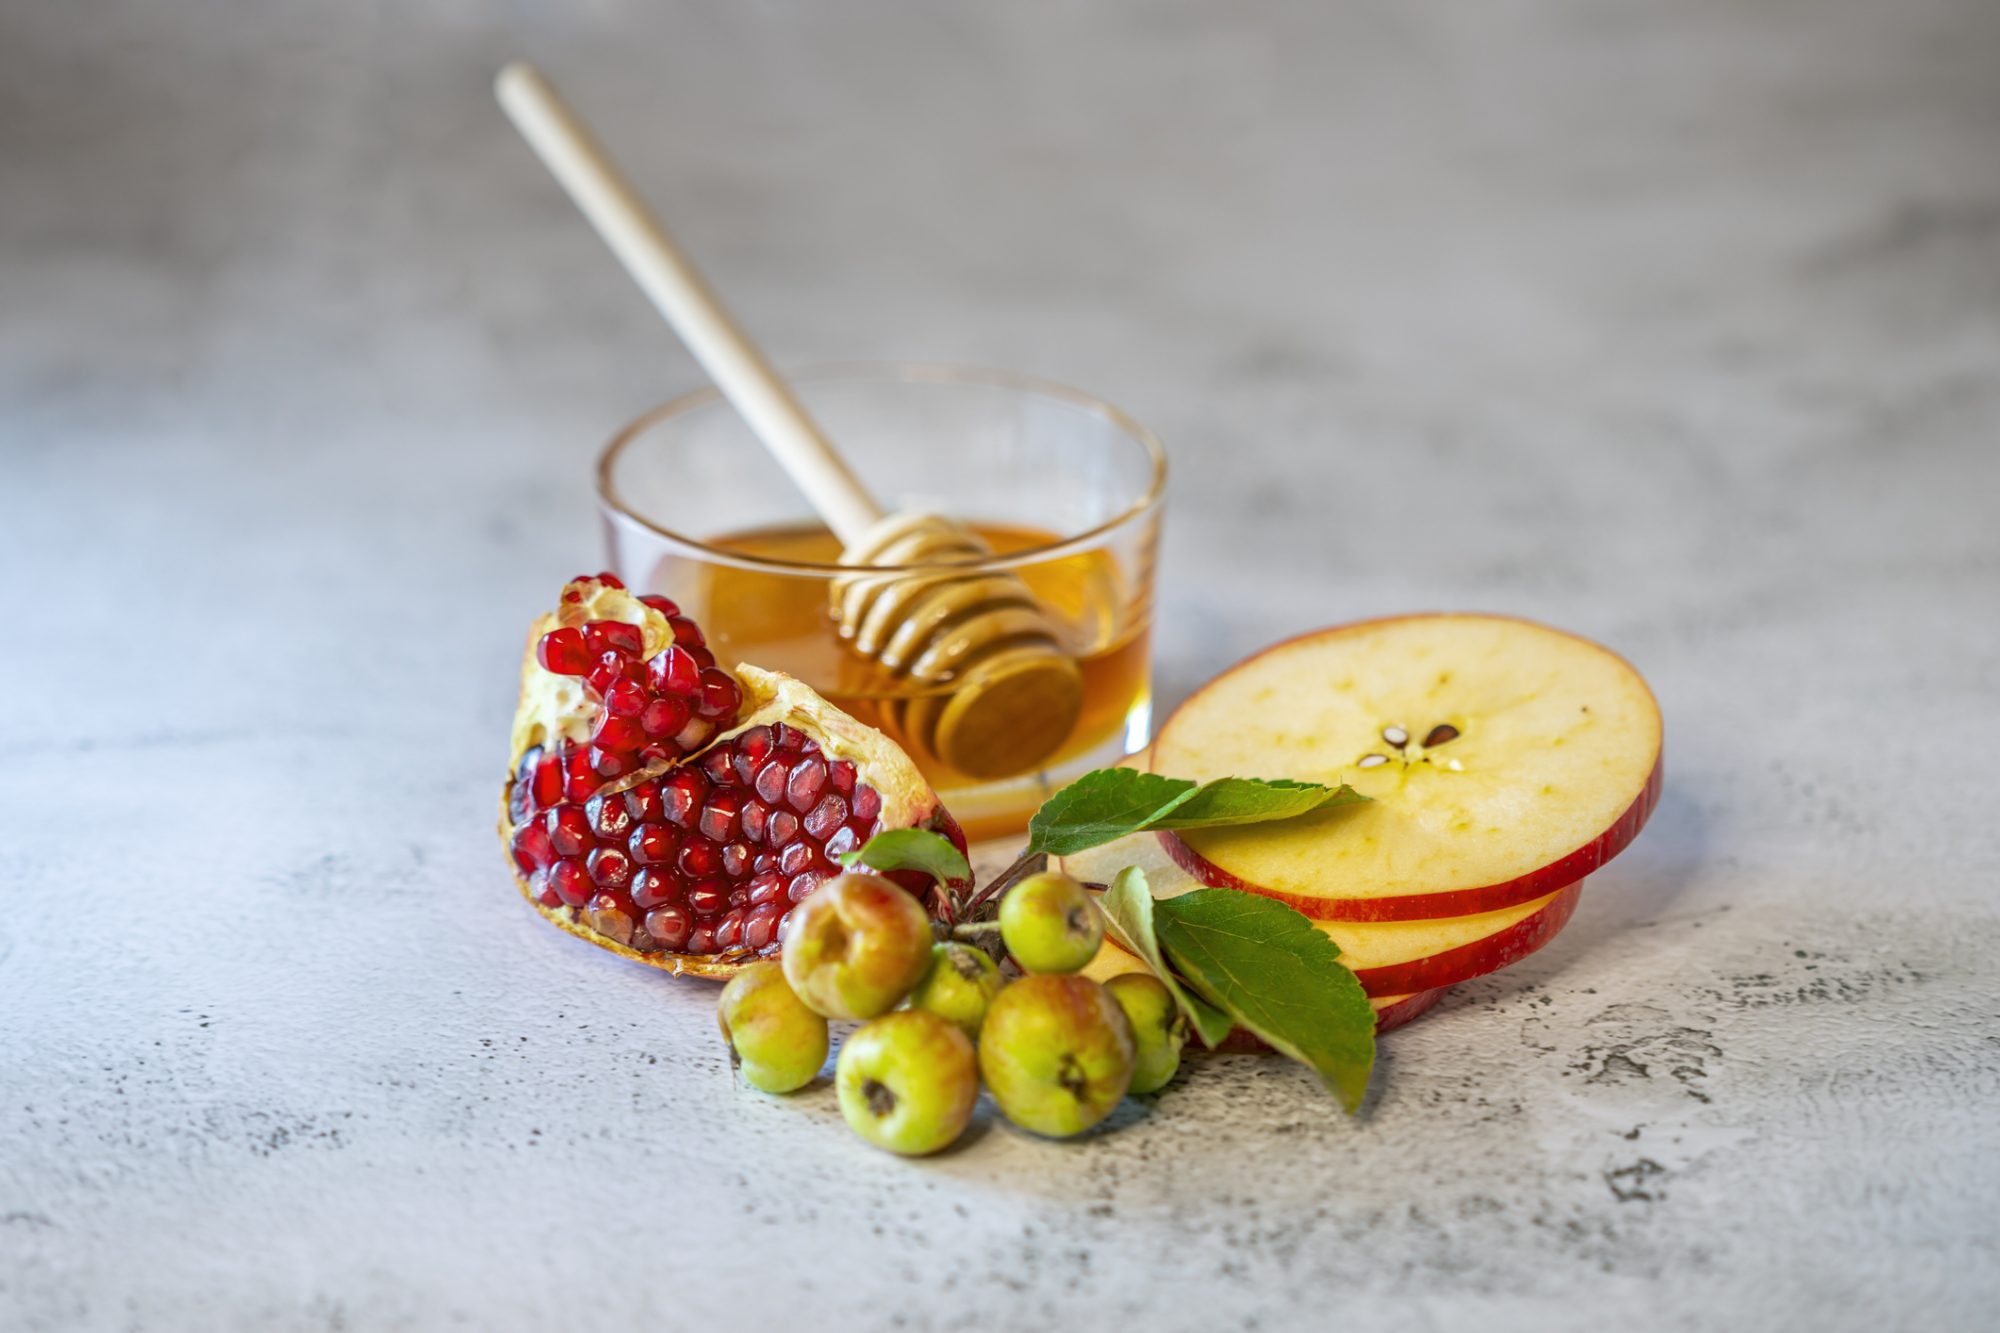 An image of apples, pomegranate, and honey for Rosh Hashanah.